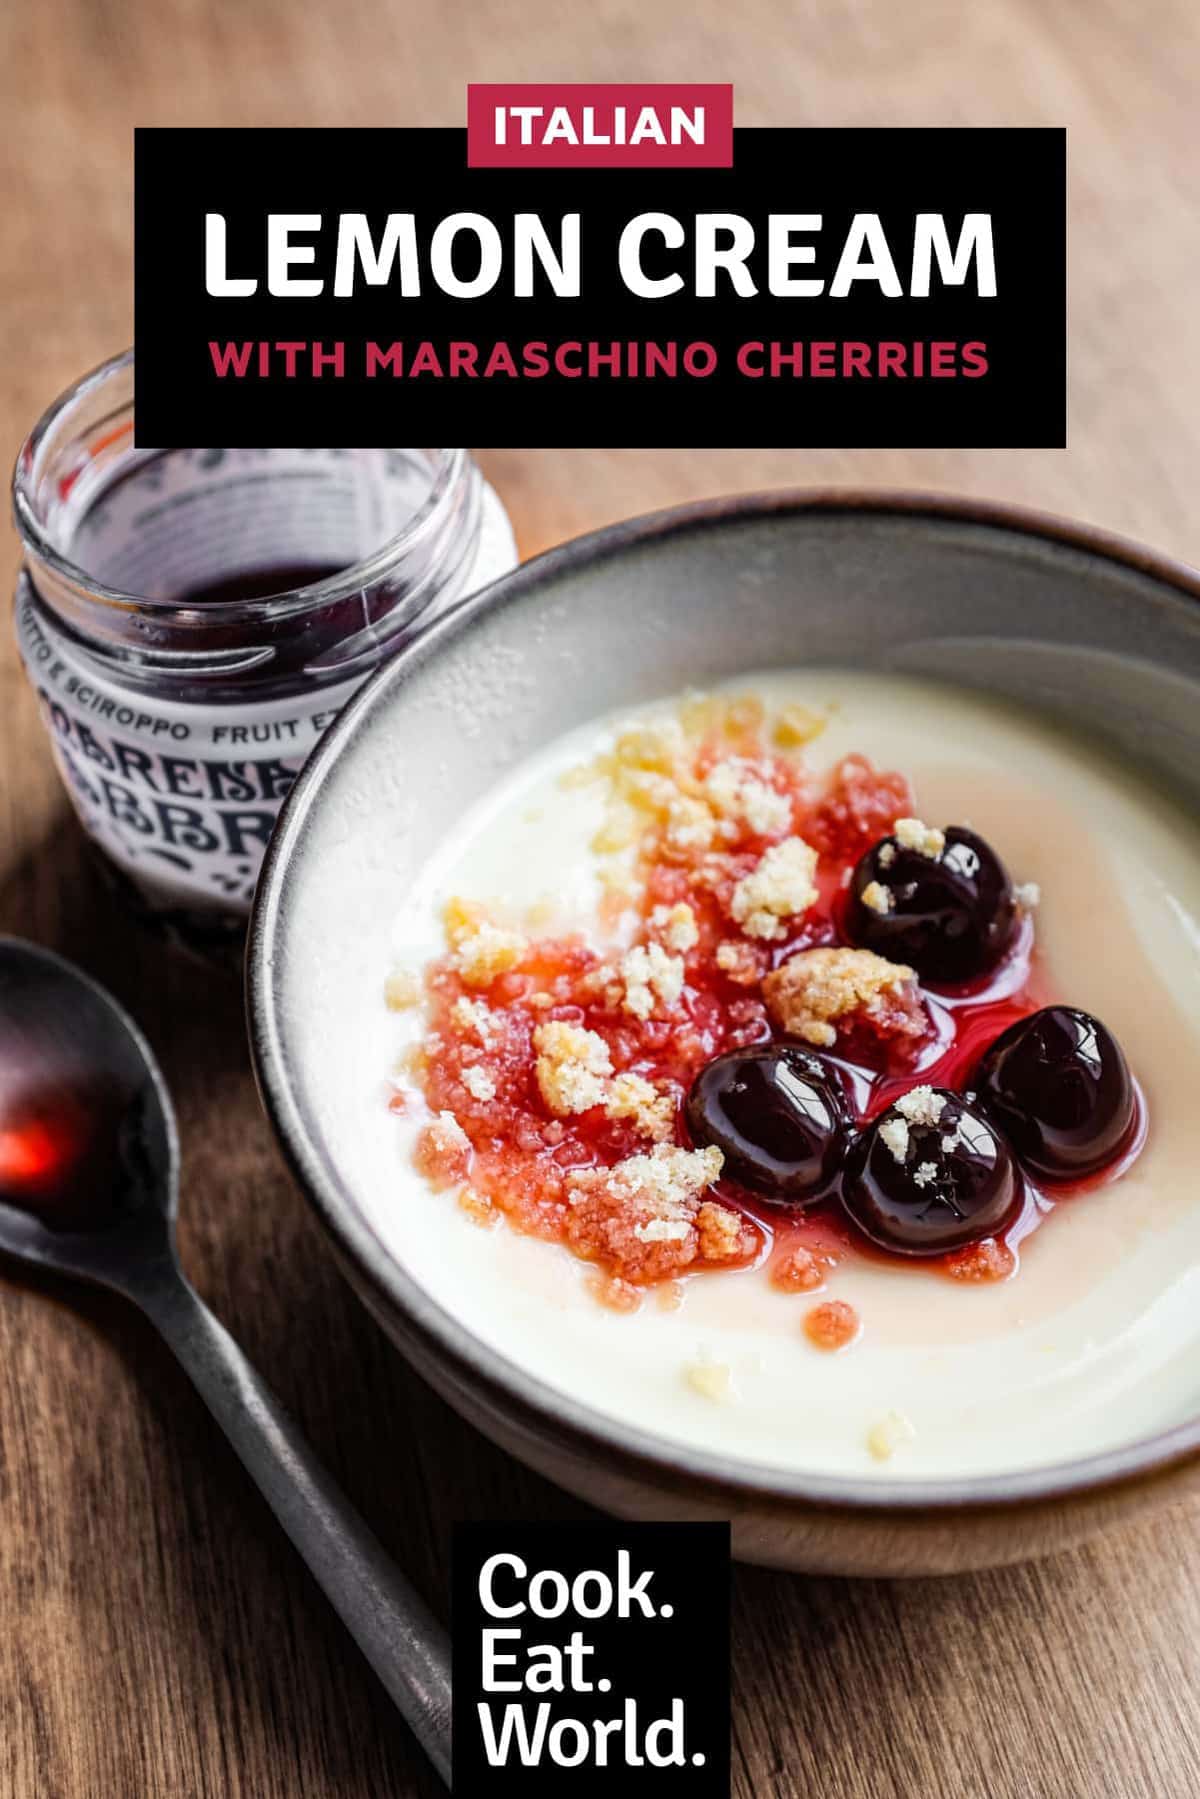 A bowl of lemon cream dessert topped with maraschino cherries and crumbled amaretti biscuits. A small jar of Maraschino cherries and a spoon sit alongside.